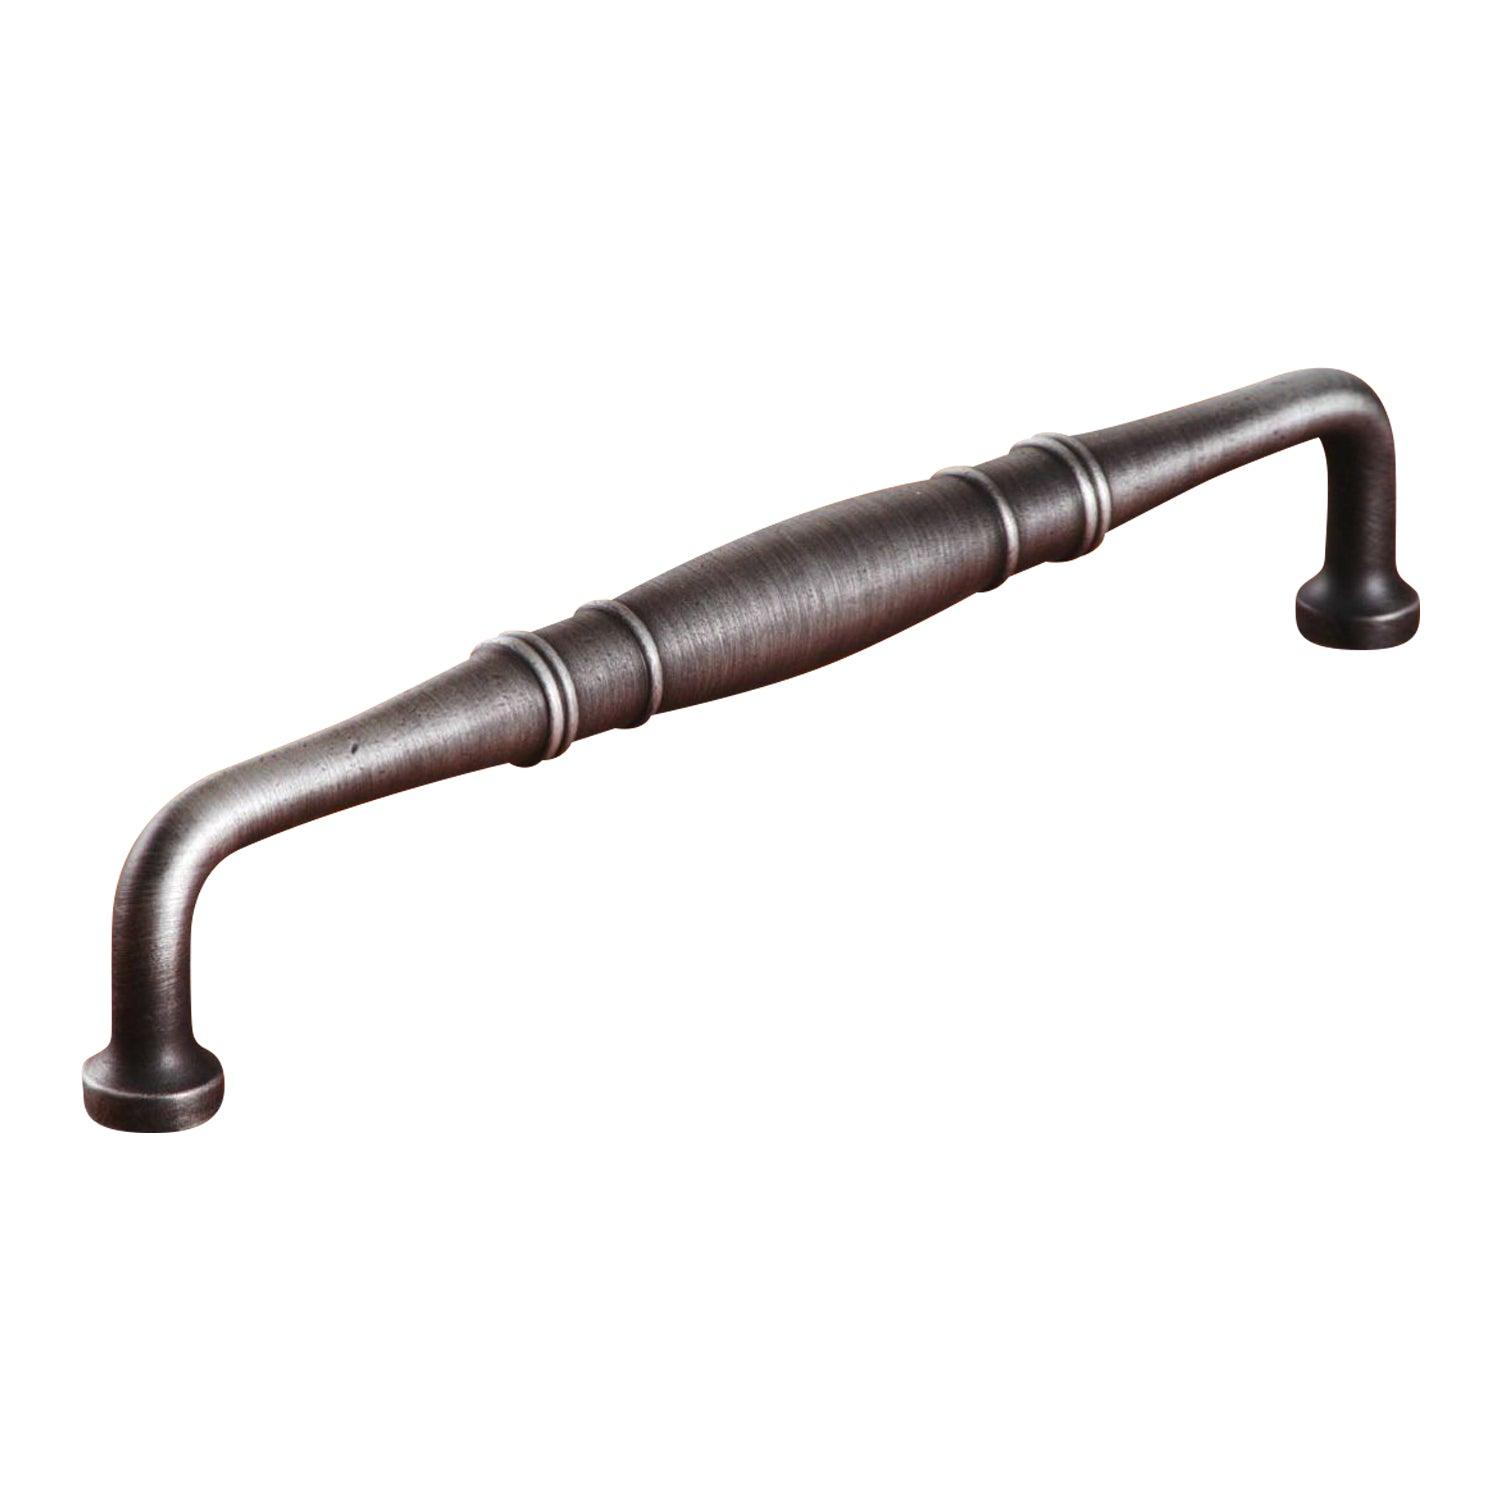 RKI - Barrel Middle Collection - Appliance Pull - APex Hardware NY 